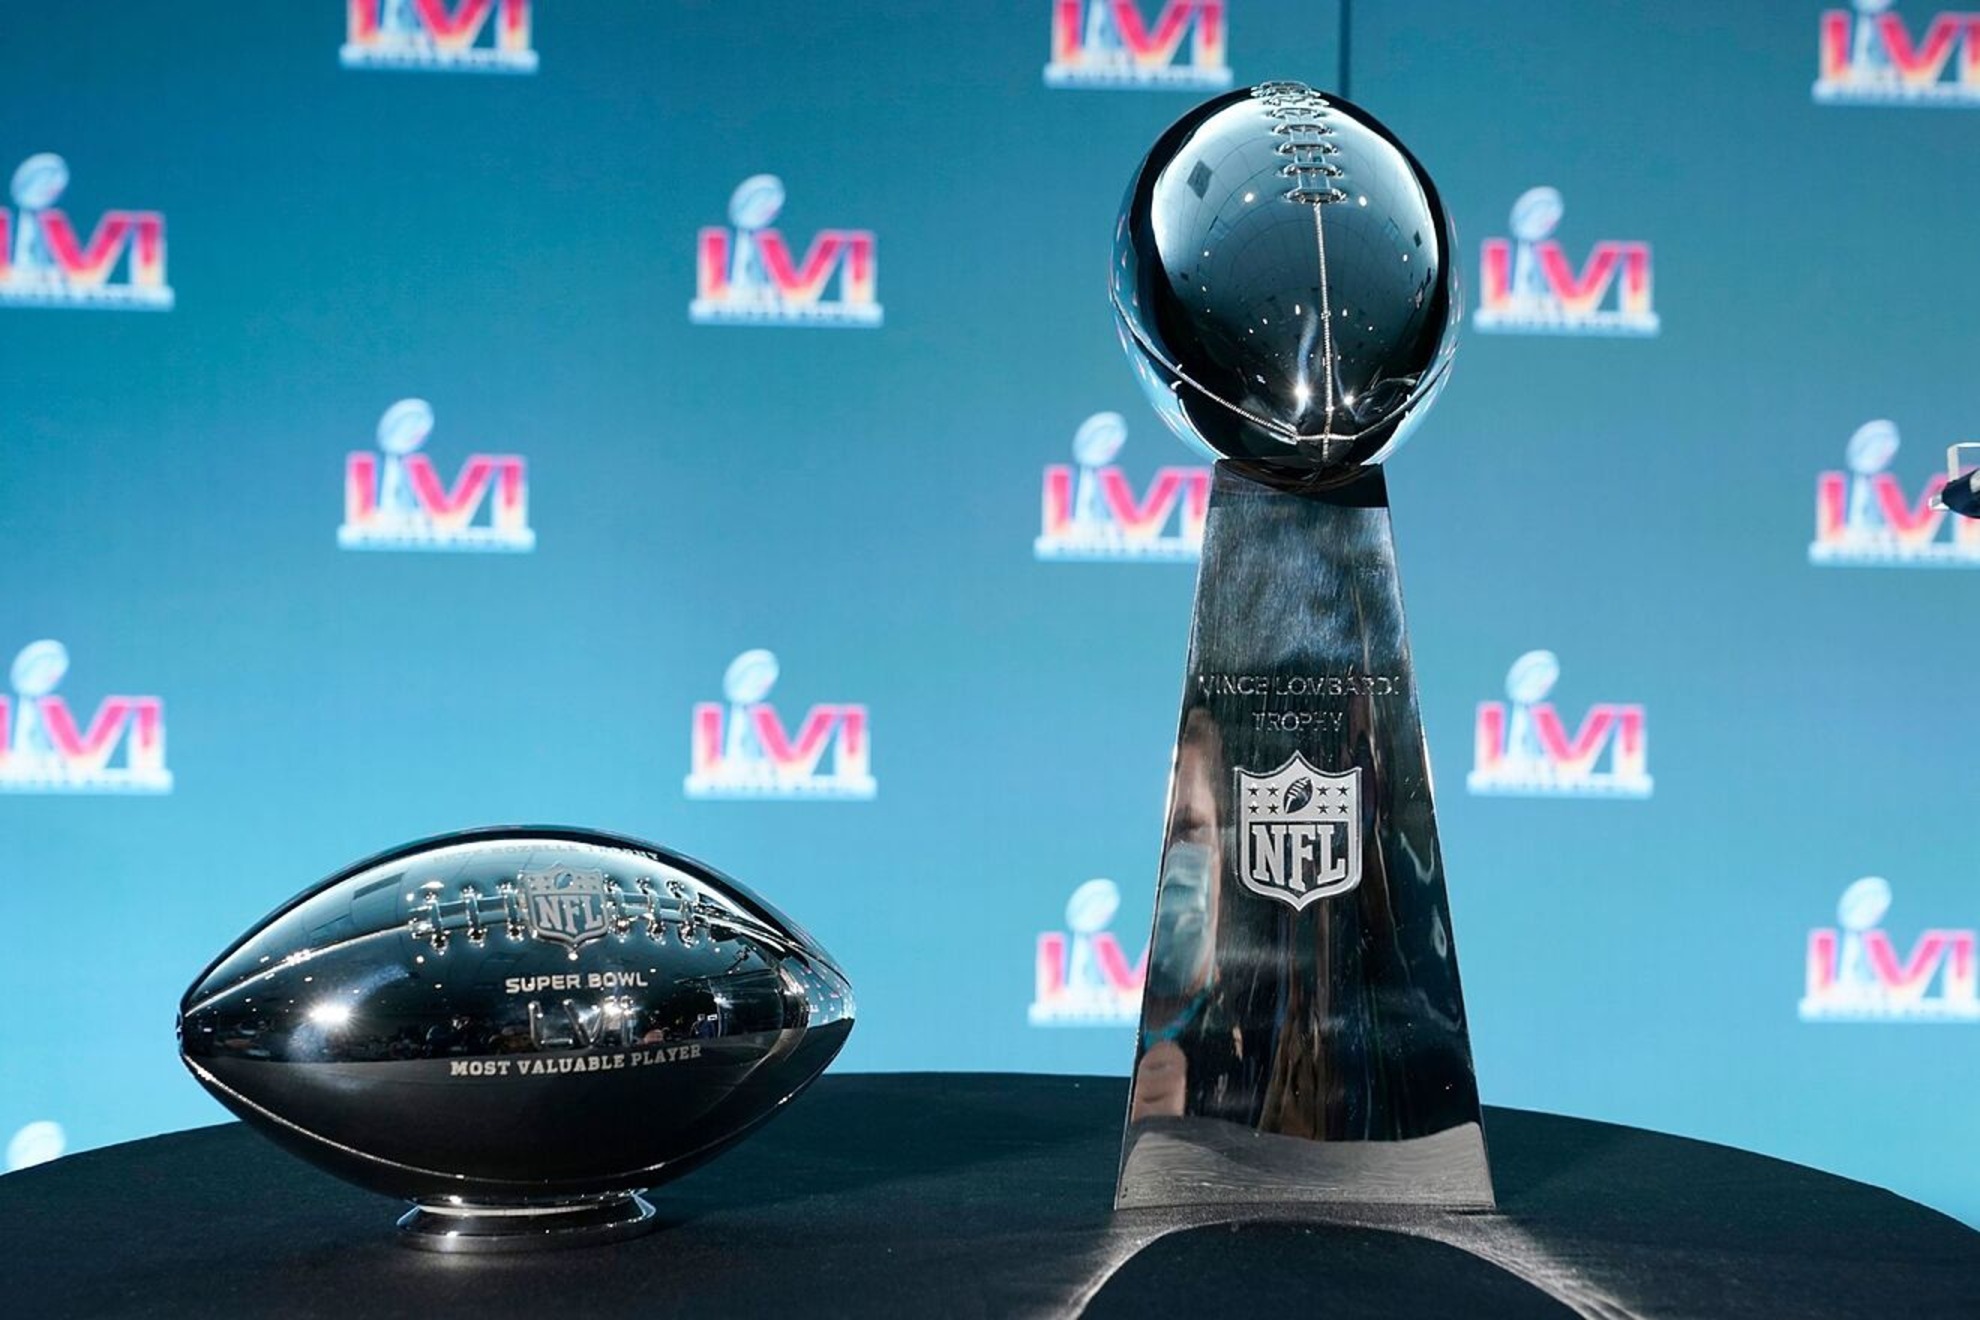 The Vince Lombardi Trophy